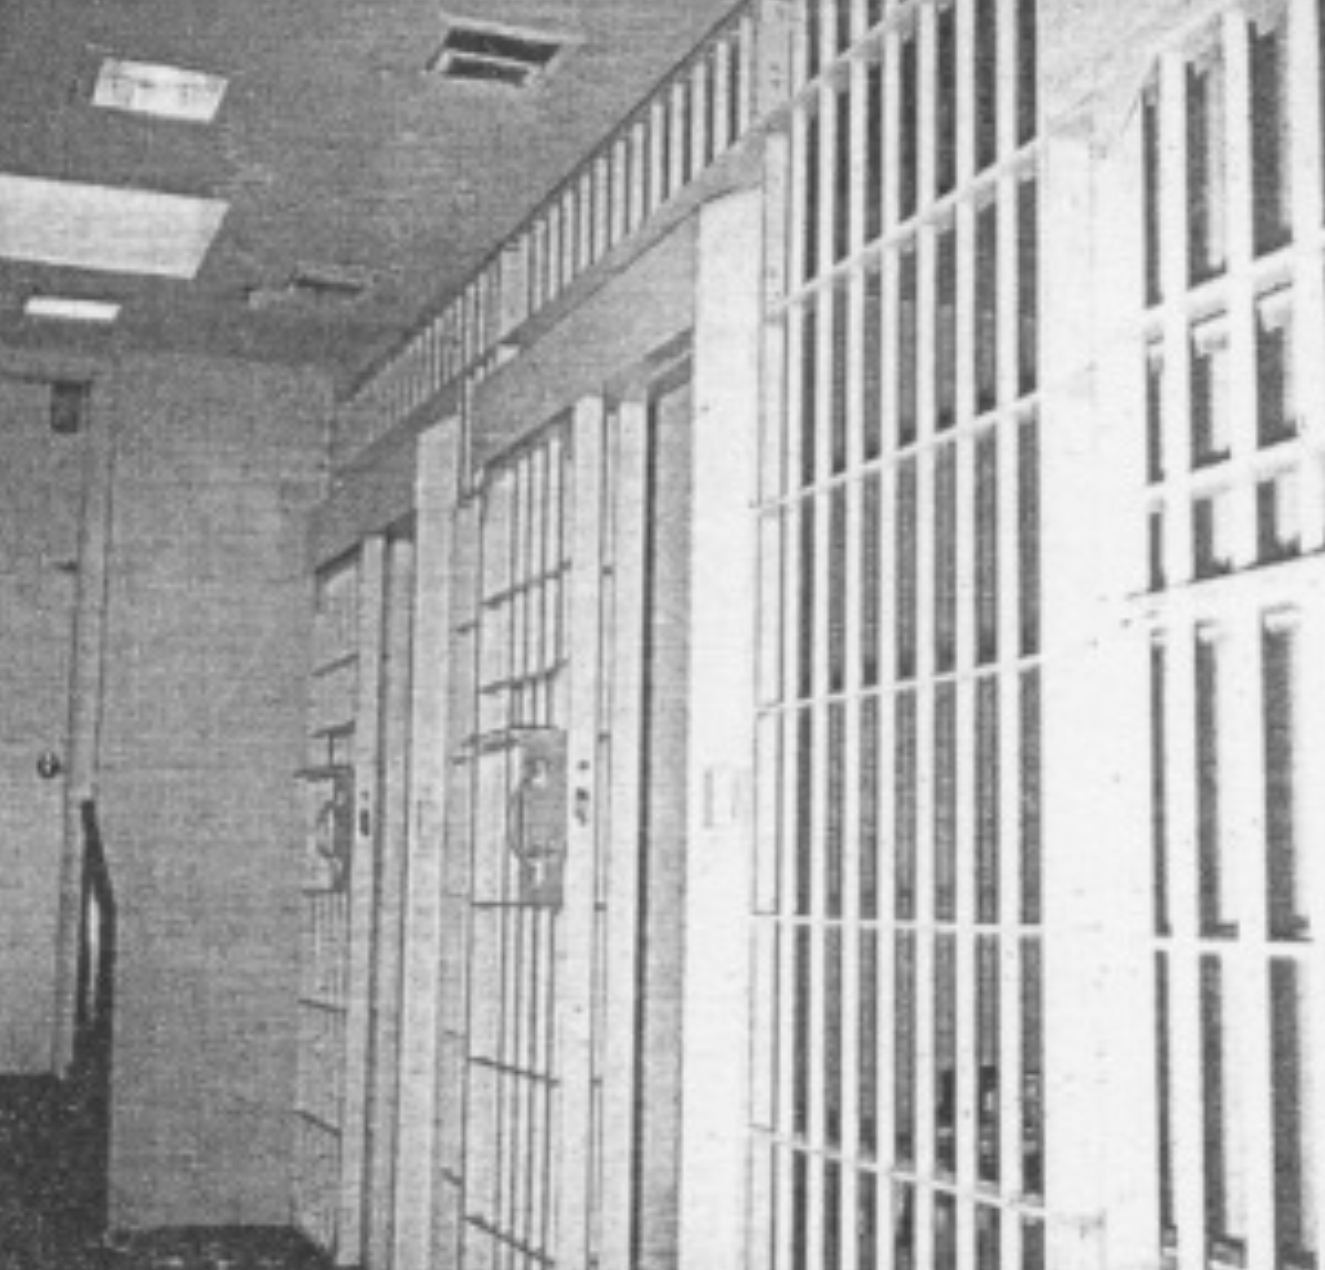 Jail Cells at Police Station at City Hall on West Street